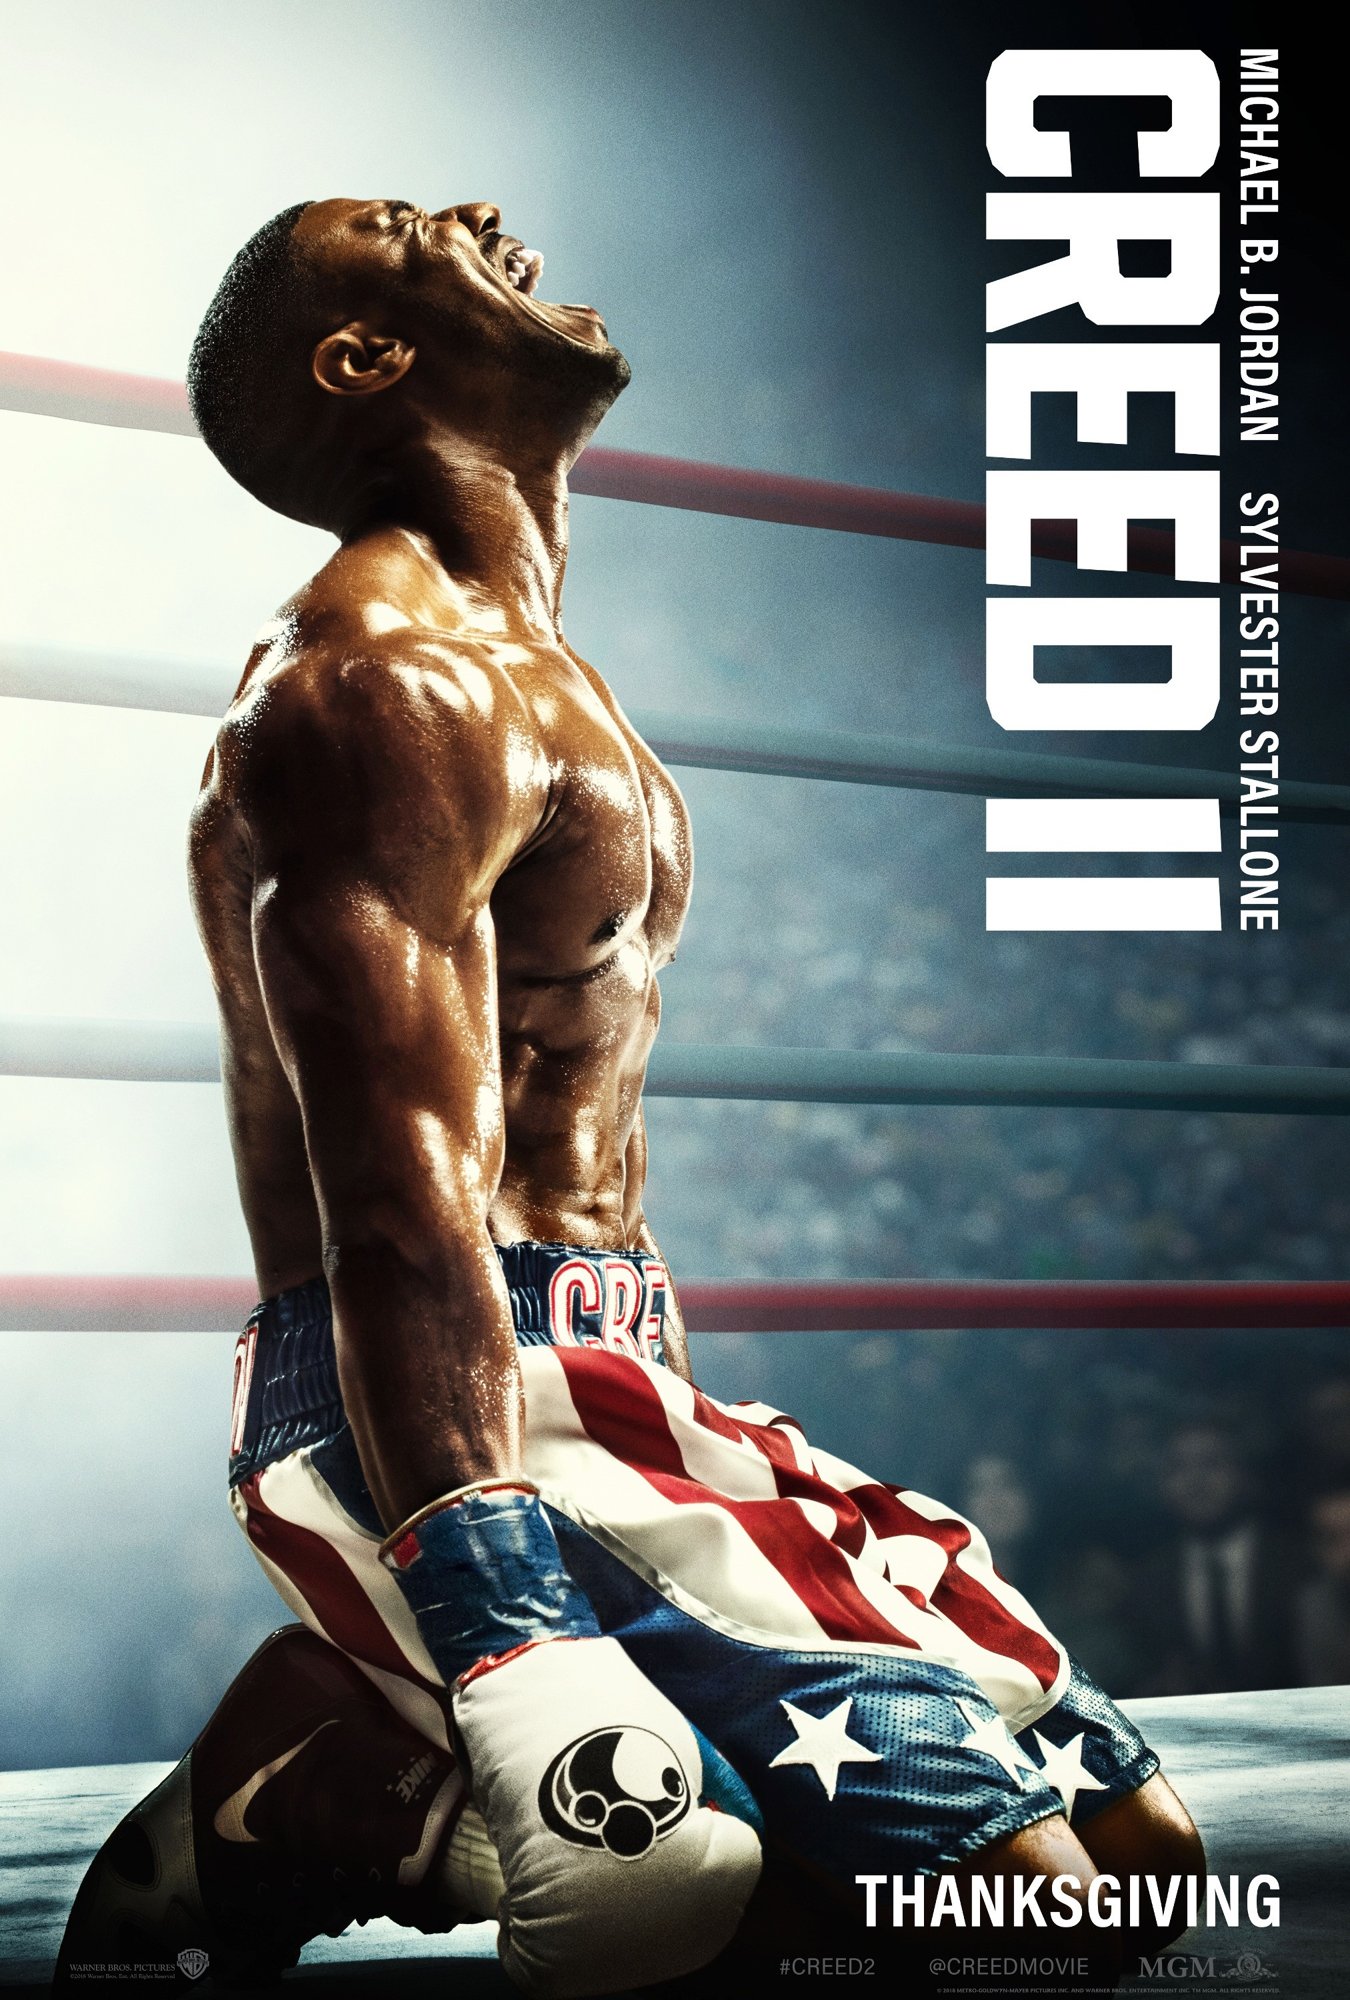 Poster of MGM's Creed II (2018)